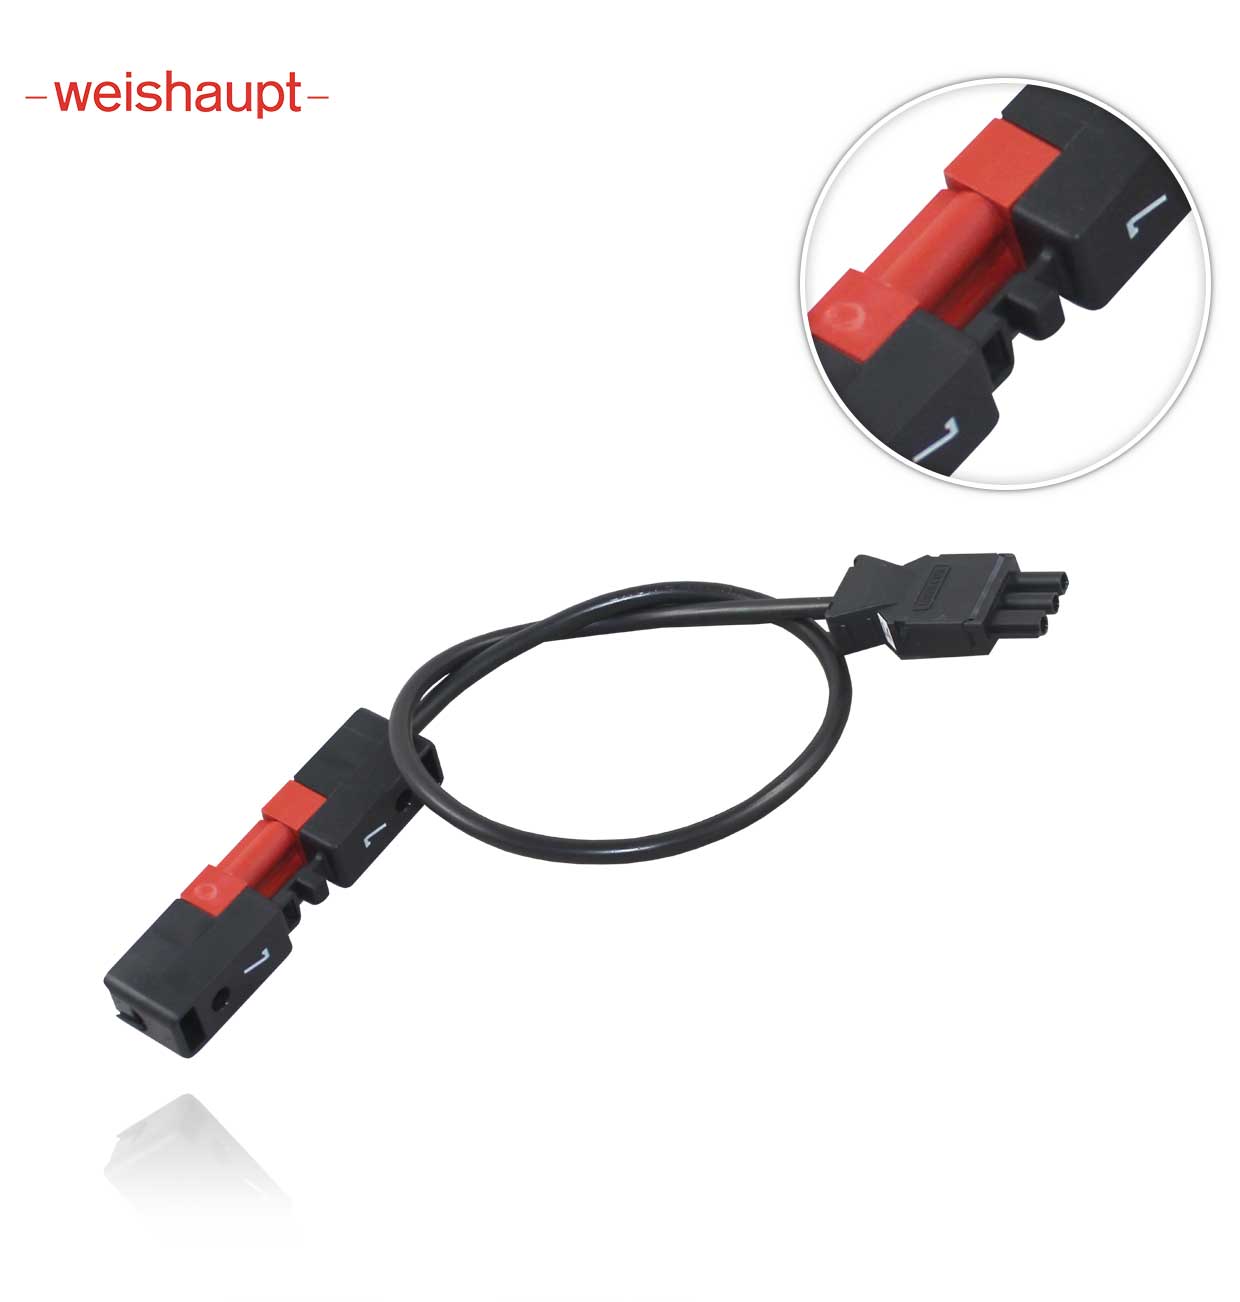 CABLE ENCHUFABLE  Nº14  DESBLOQUEO  WEISHAUPT 23011012362